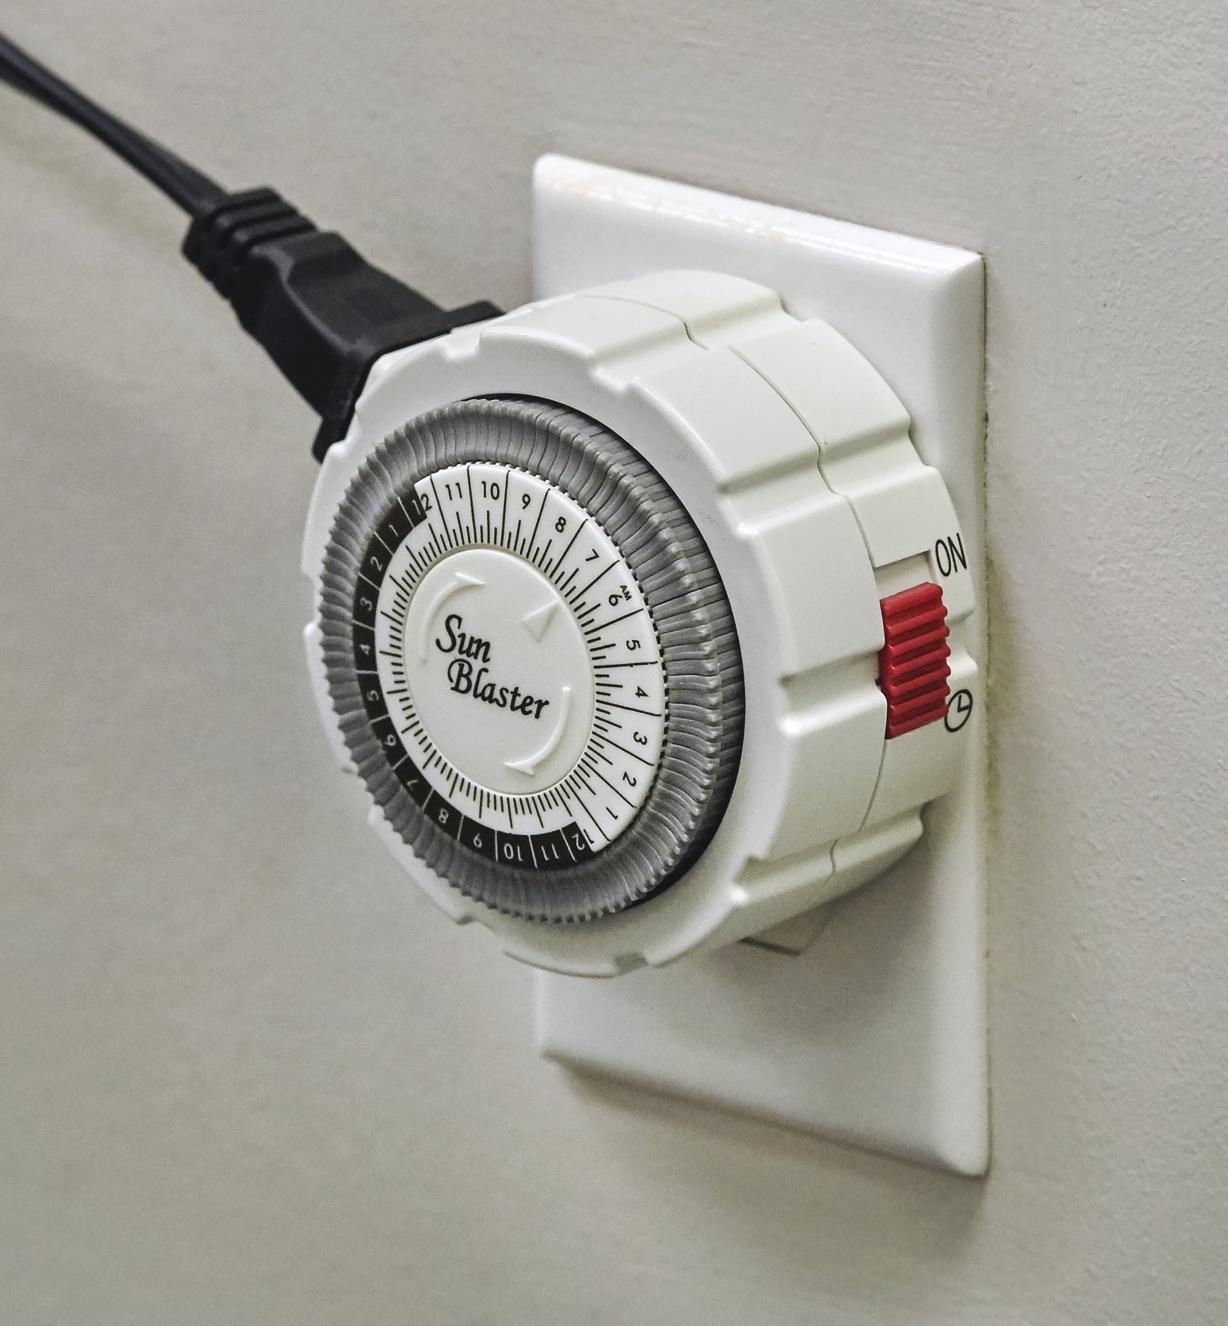 A close view of the mechanical timer connected to the grow-light cord and plugged into a wall outlet